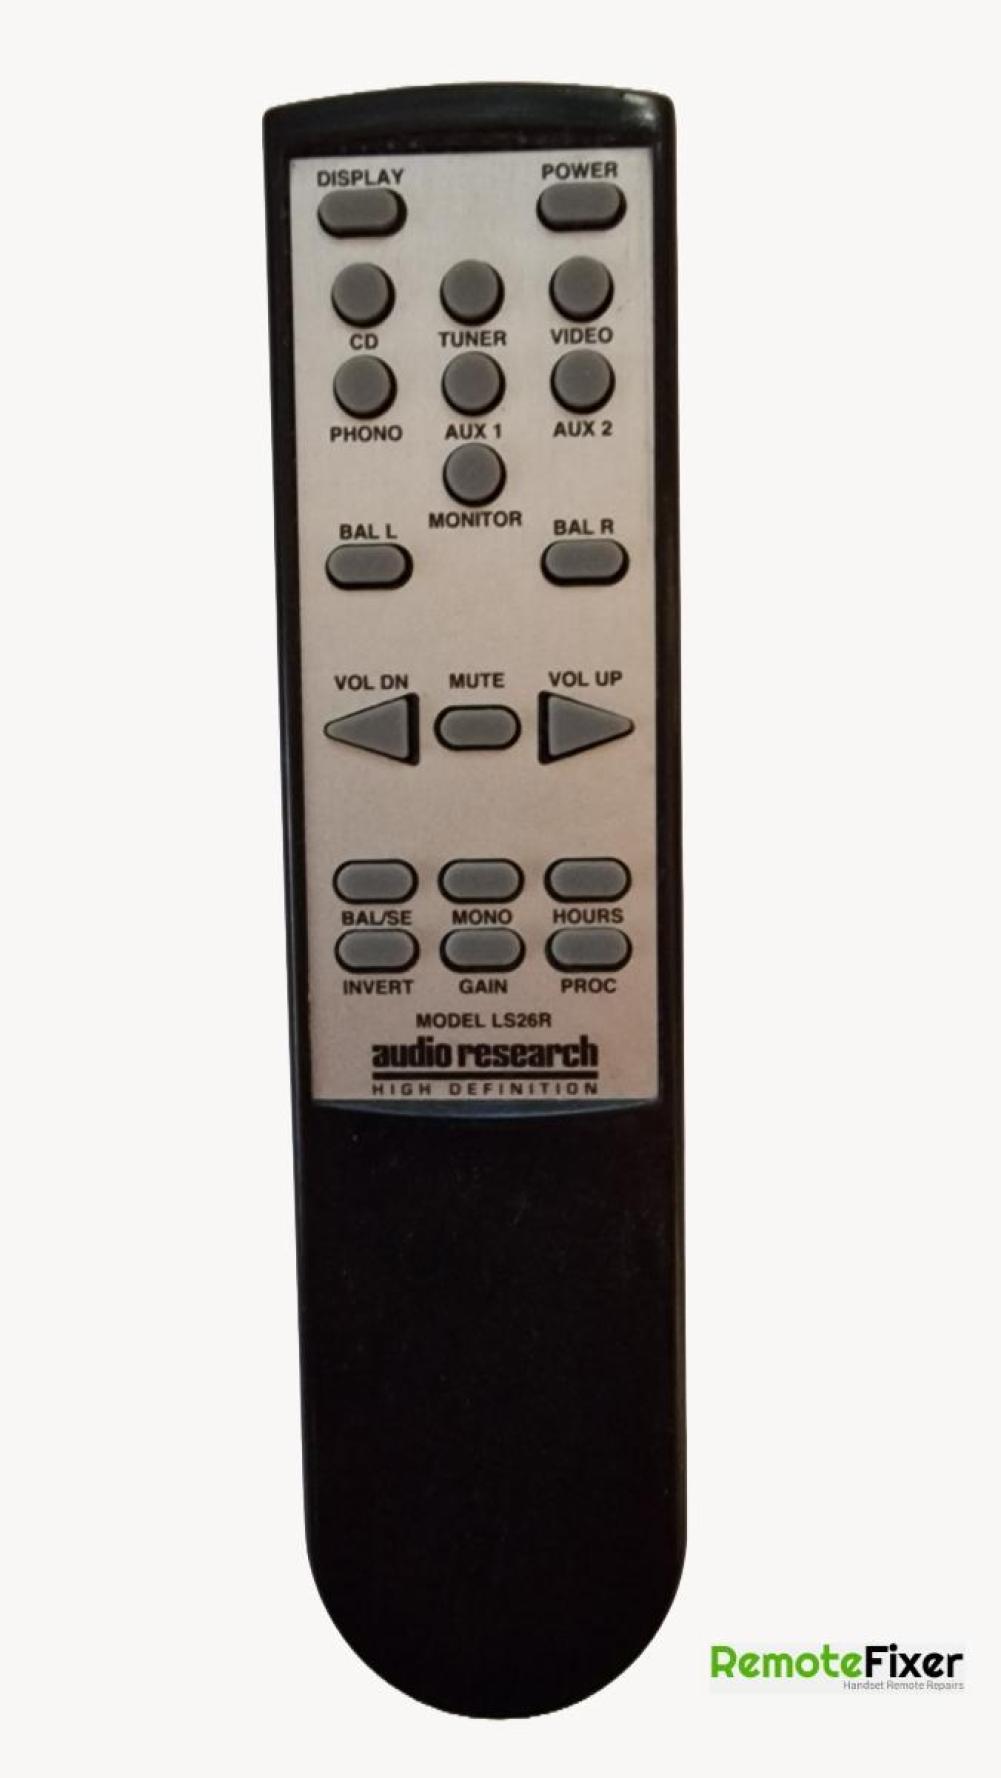 Audio Research  Remote Control - Front Image